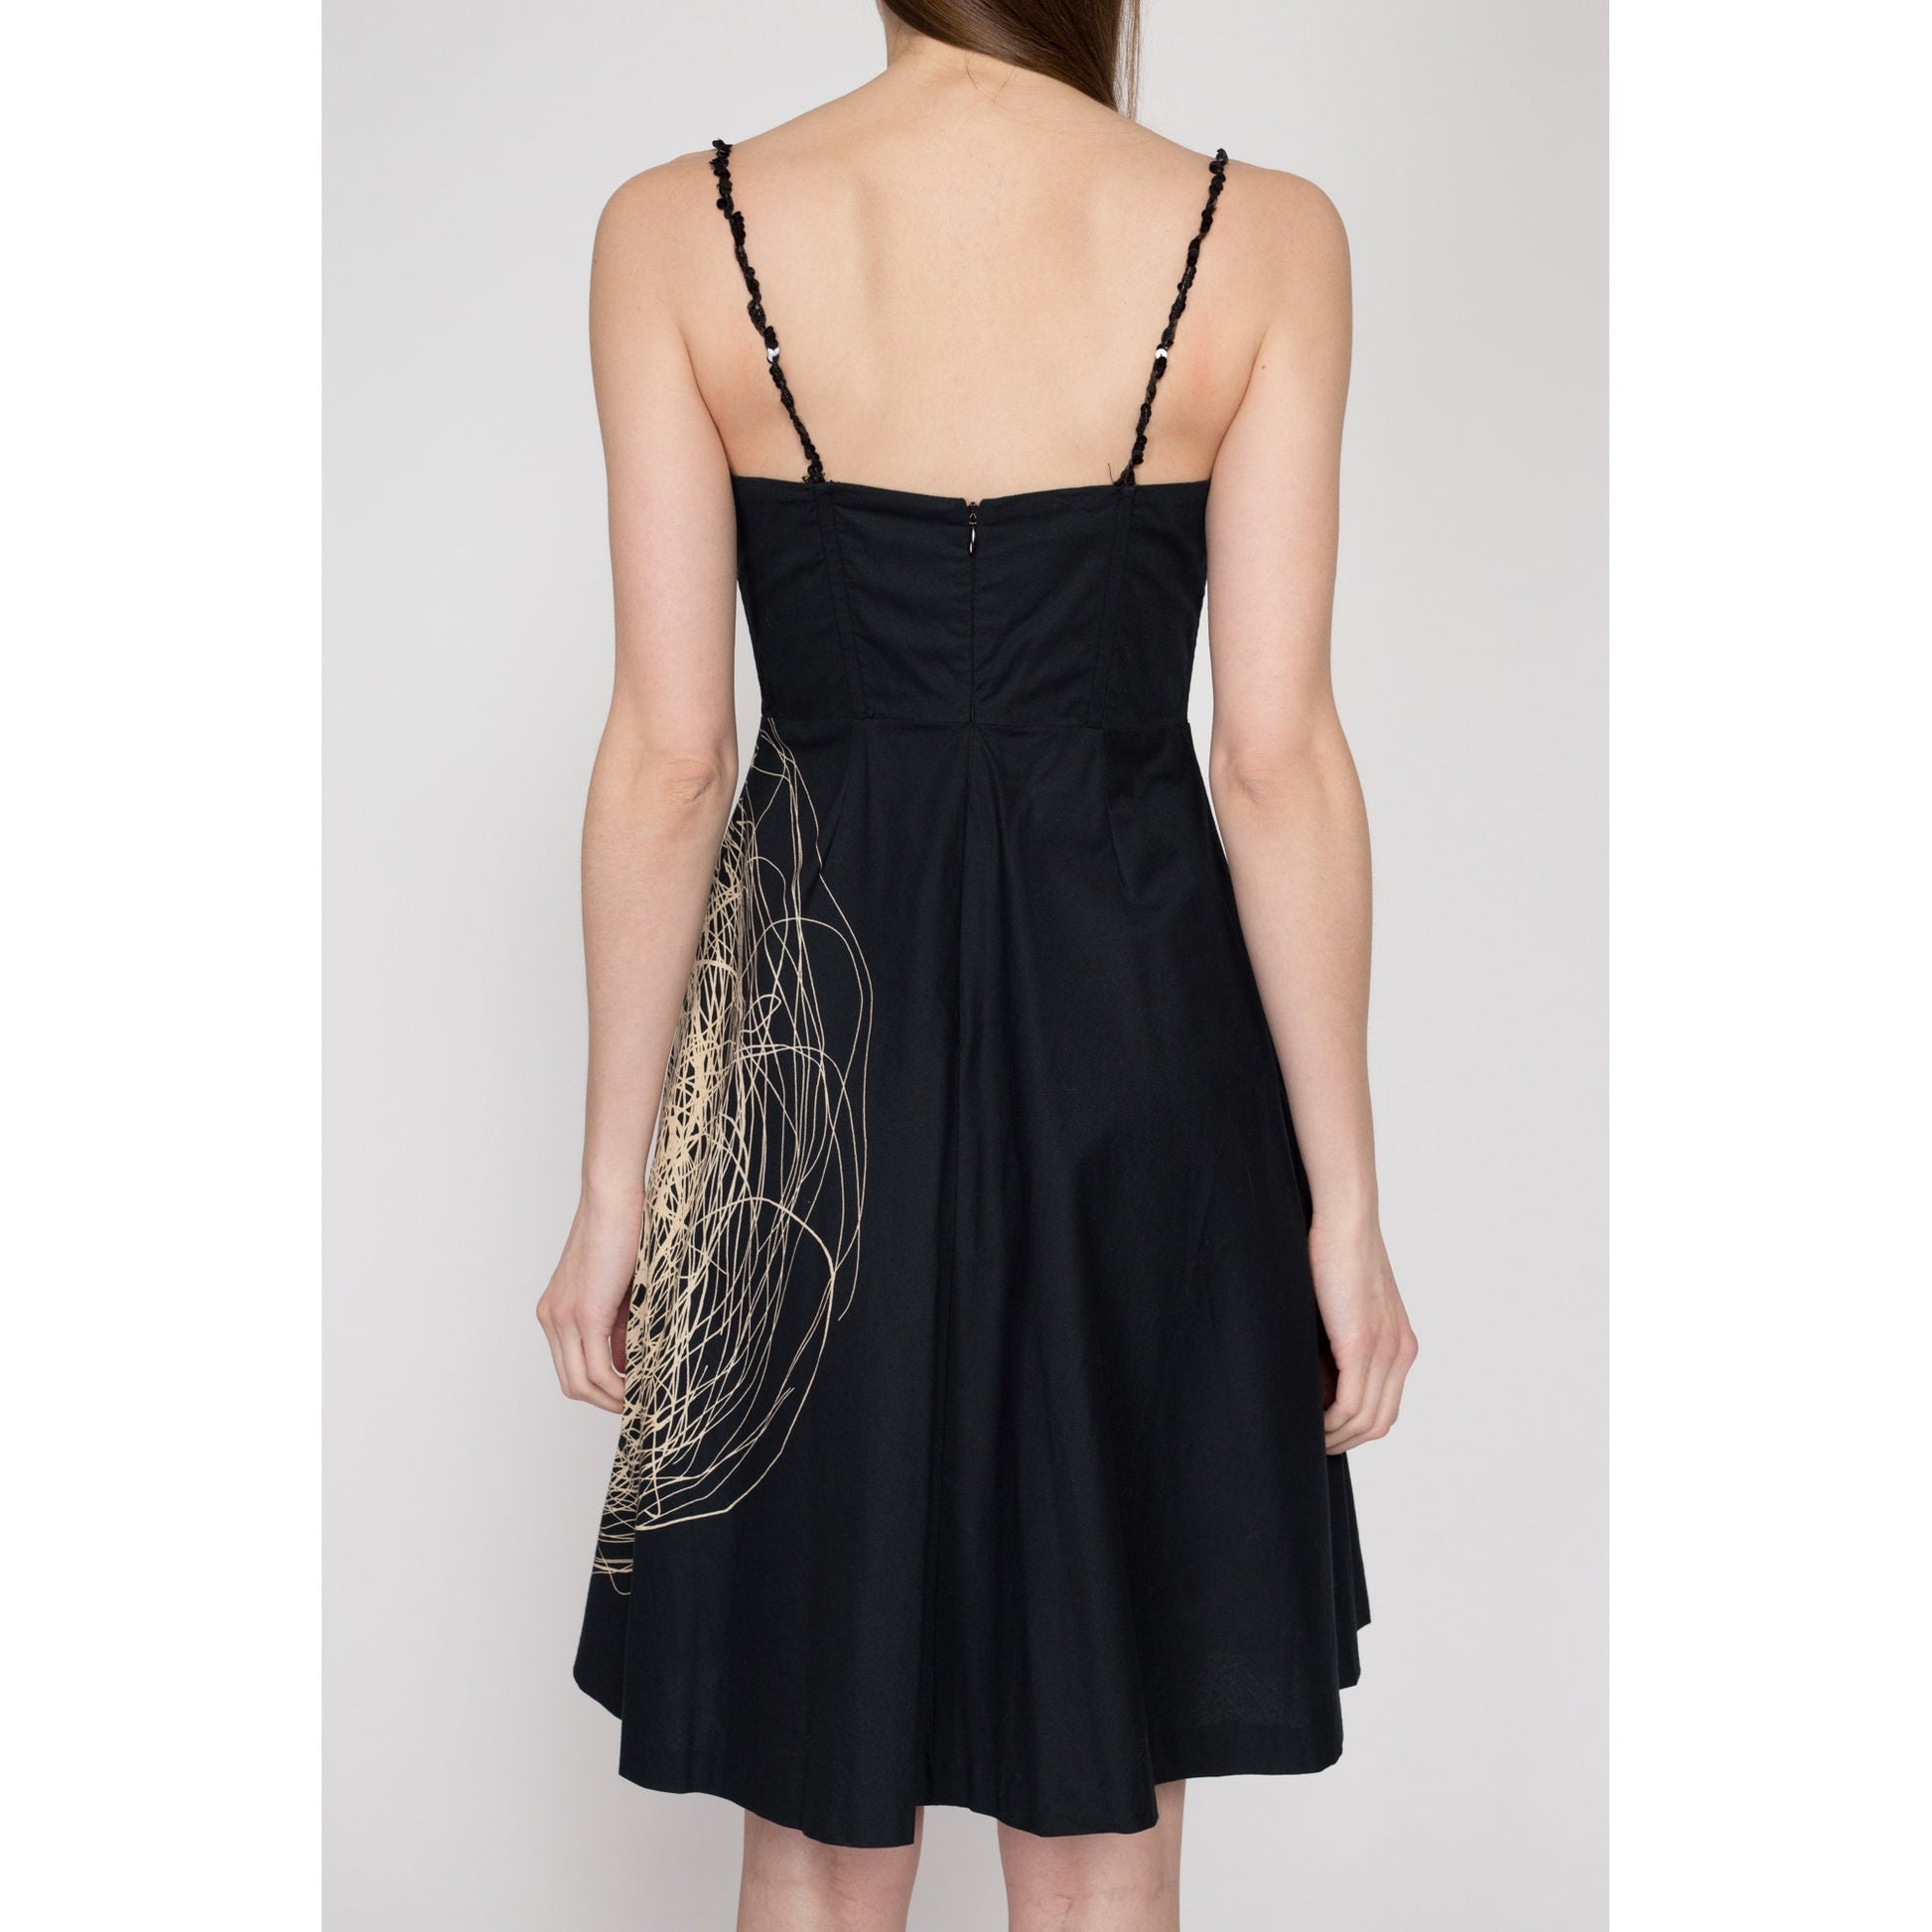 XS Vintage Patrizia Pepe Scribble Graphic Fit & Flare Dress | Y2K Made In Italy Black Sequin Spaghetti Strap Party Dress